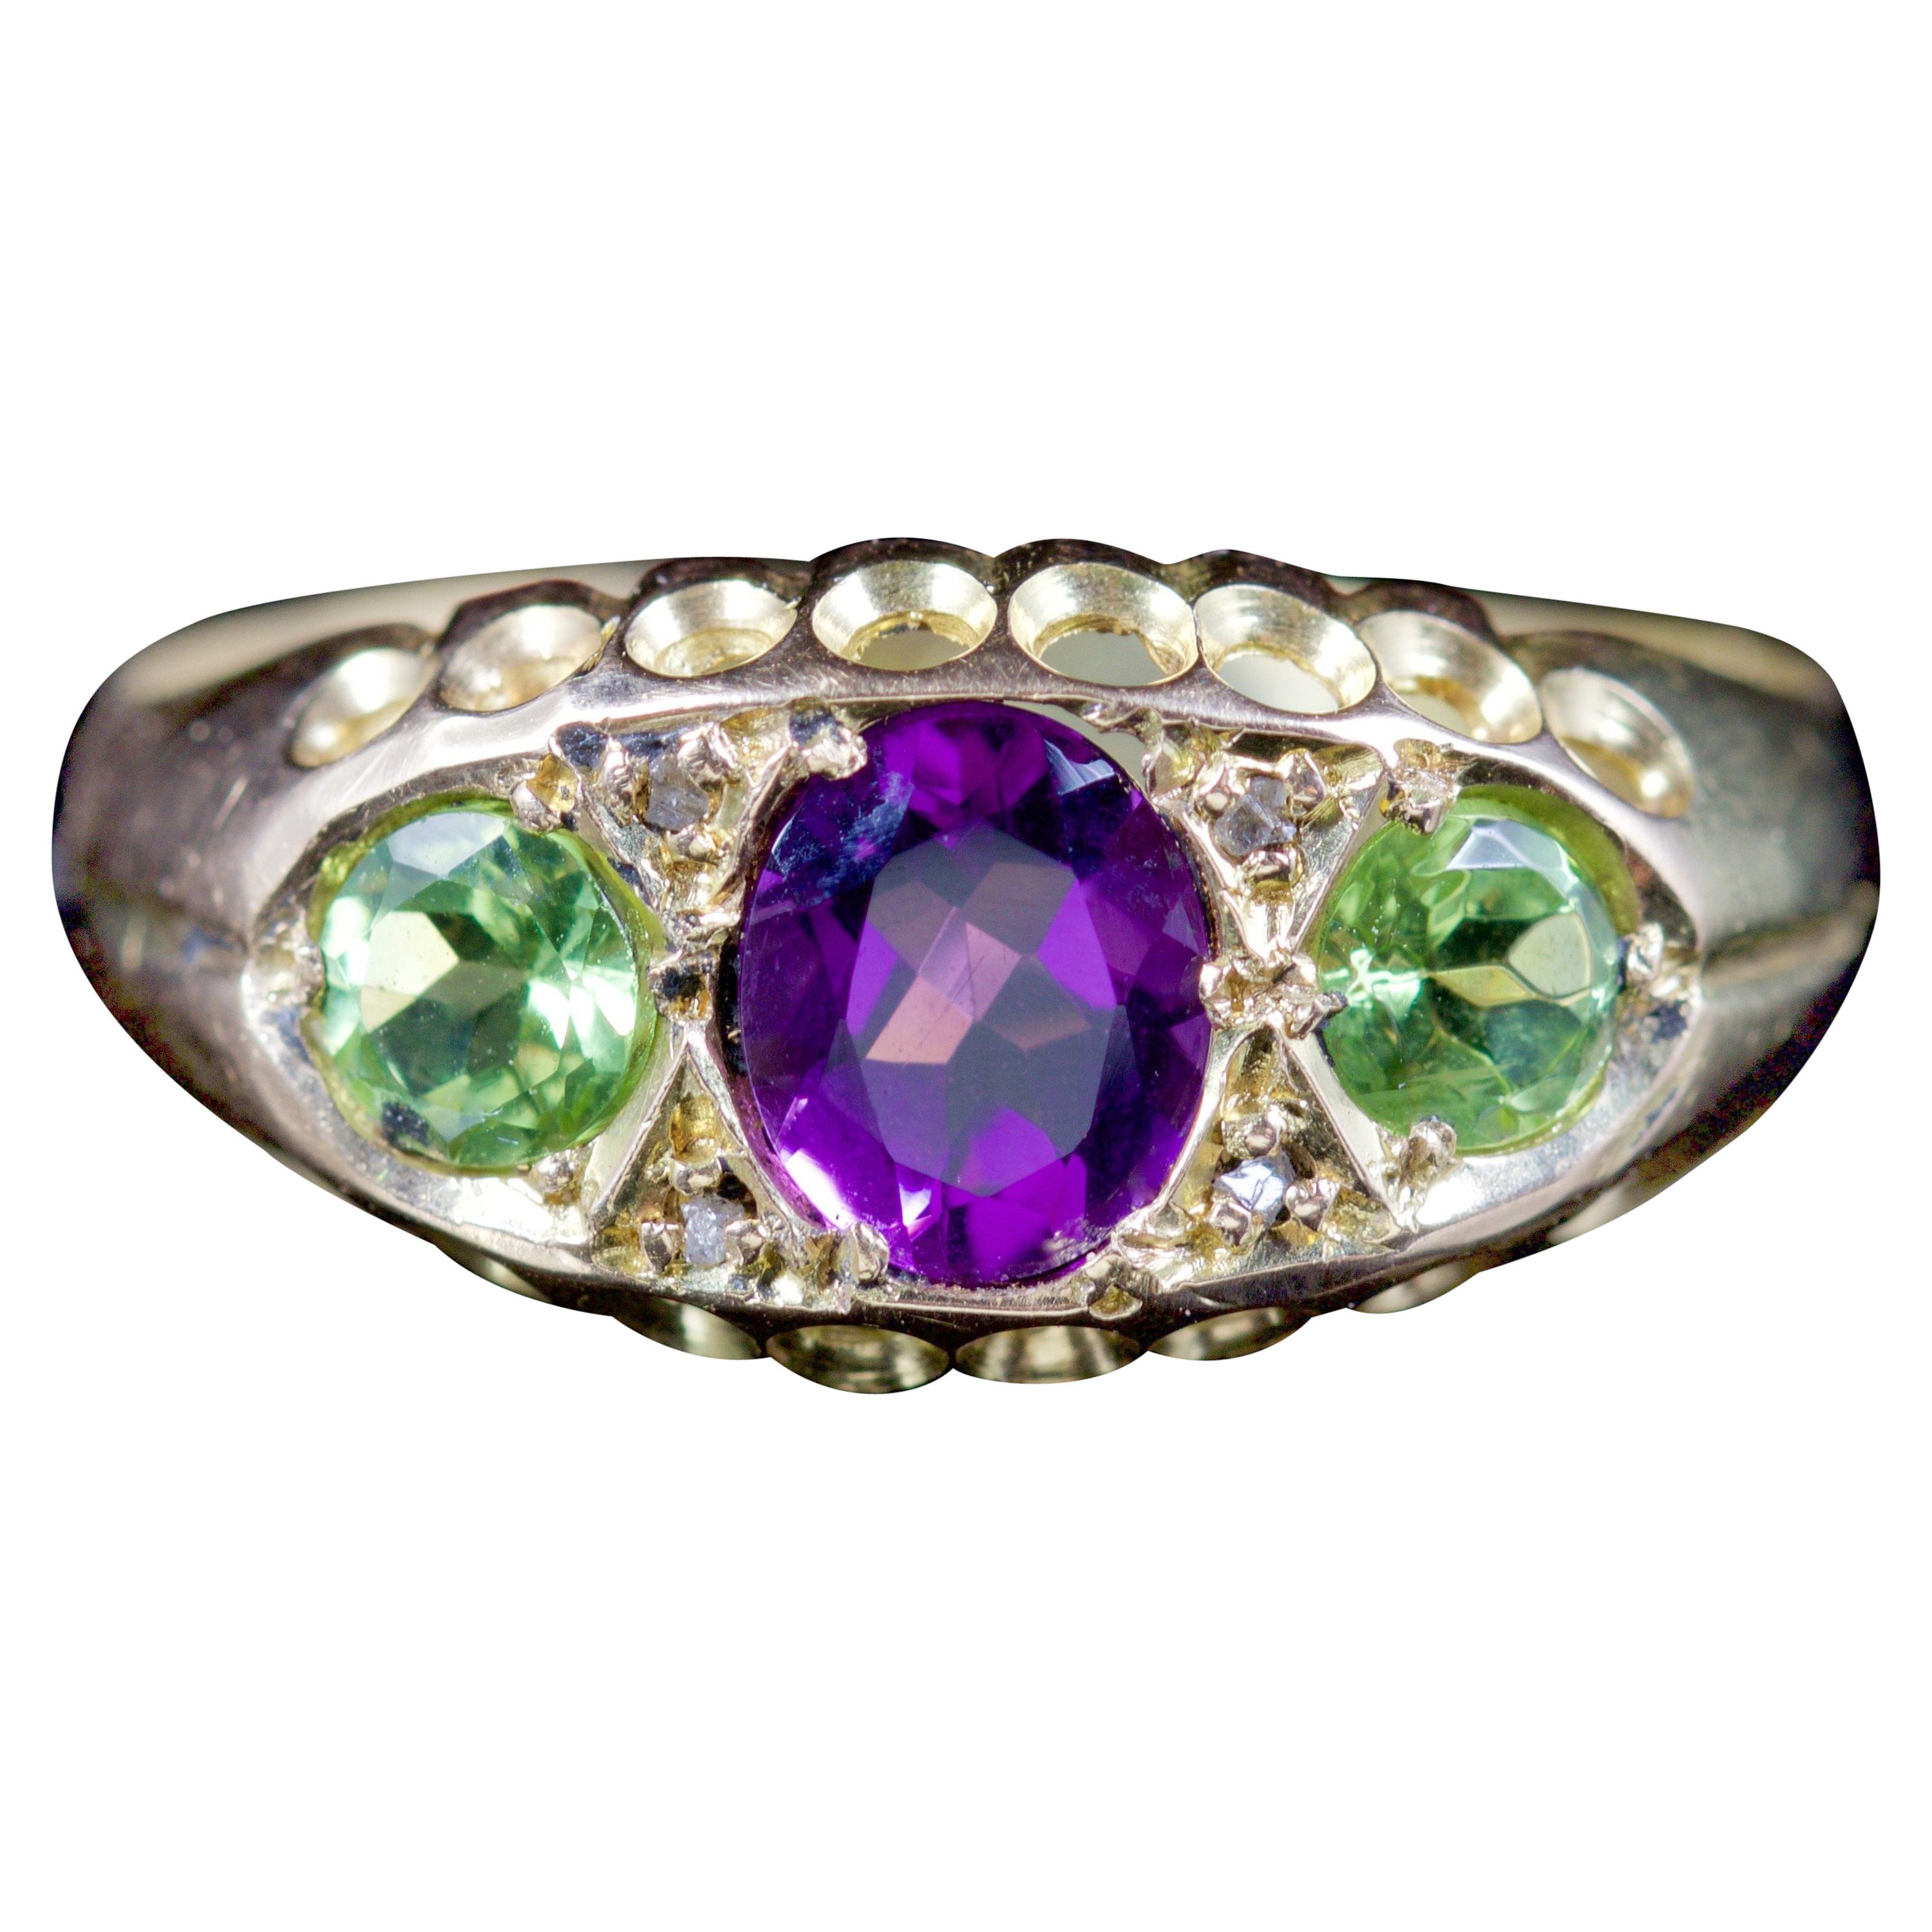 Antique Victorian Ring Suffragette Amethyst Peridot Diamond 18 Carat Dated 1912